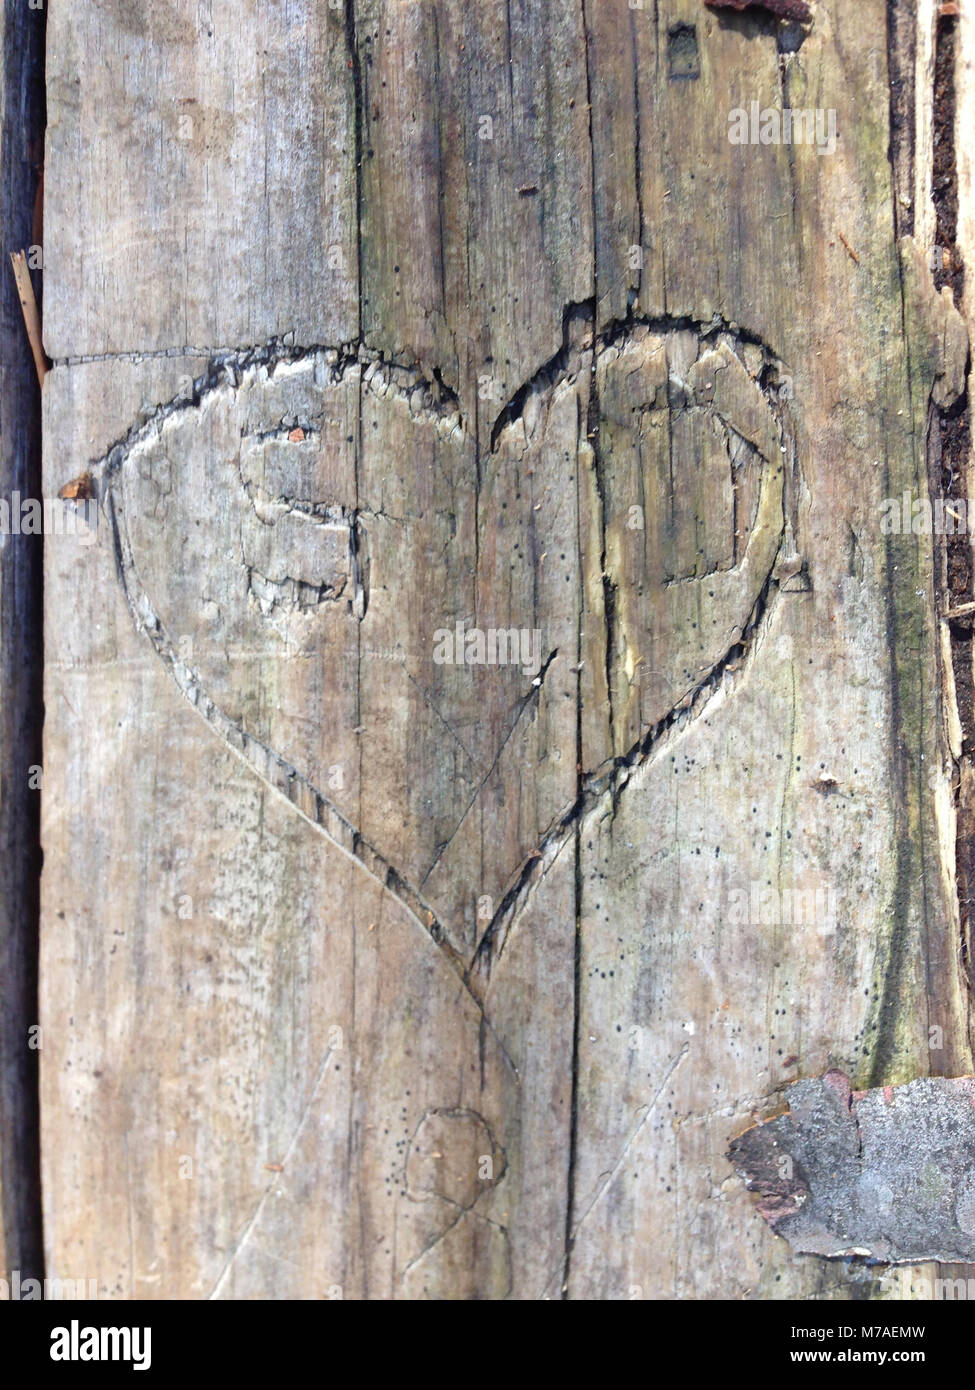 Heart carved into wood Stock Photo